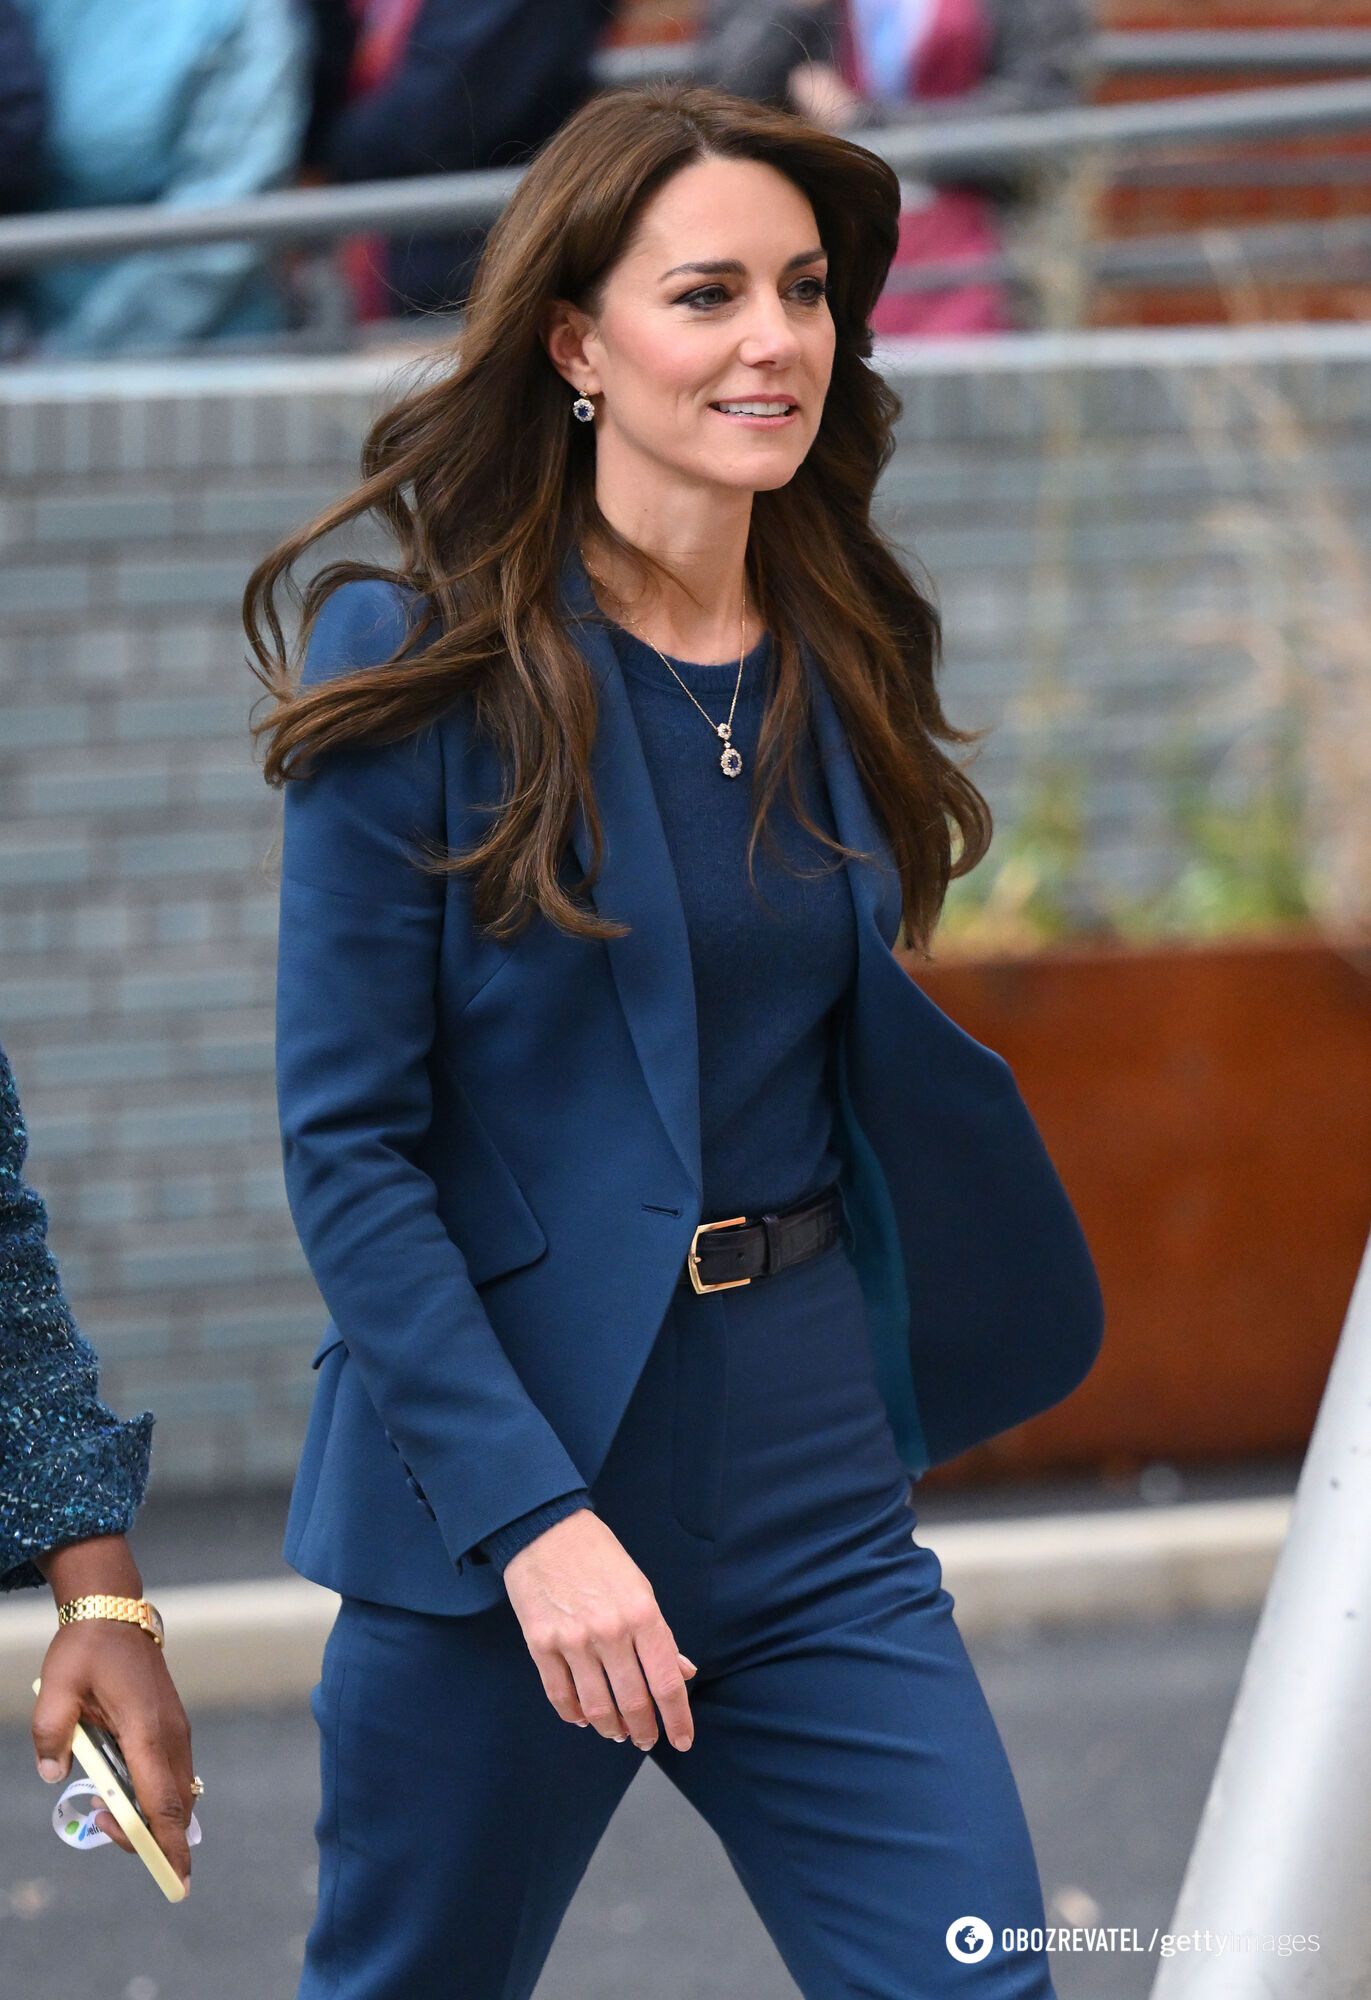 The bricks are different. Signs of photoshop were found on another photo of Kate Middleton